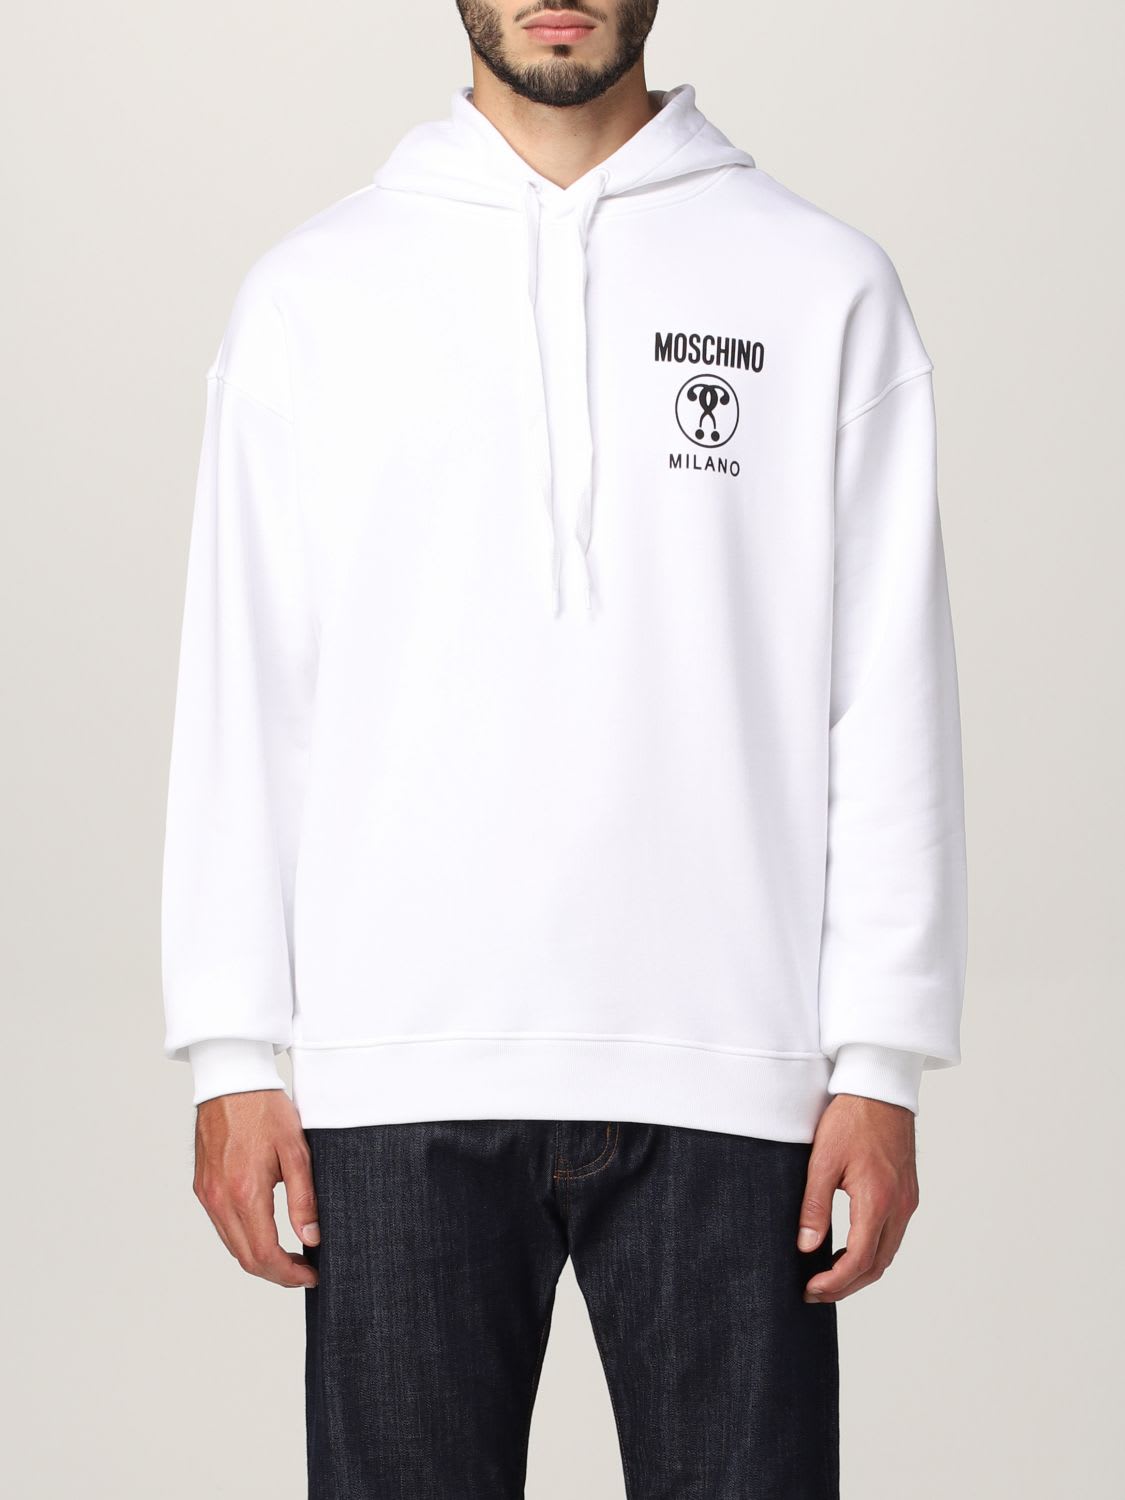 Moschino Couture Sweatshirt Double Question Mark Moschino Couture Cotton Sweatshirt